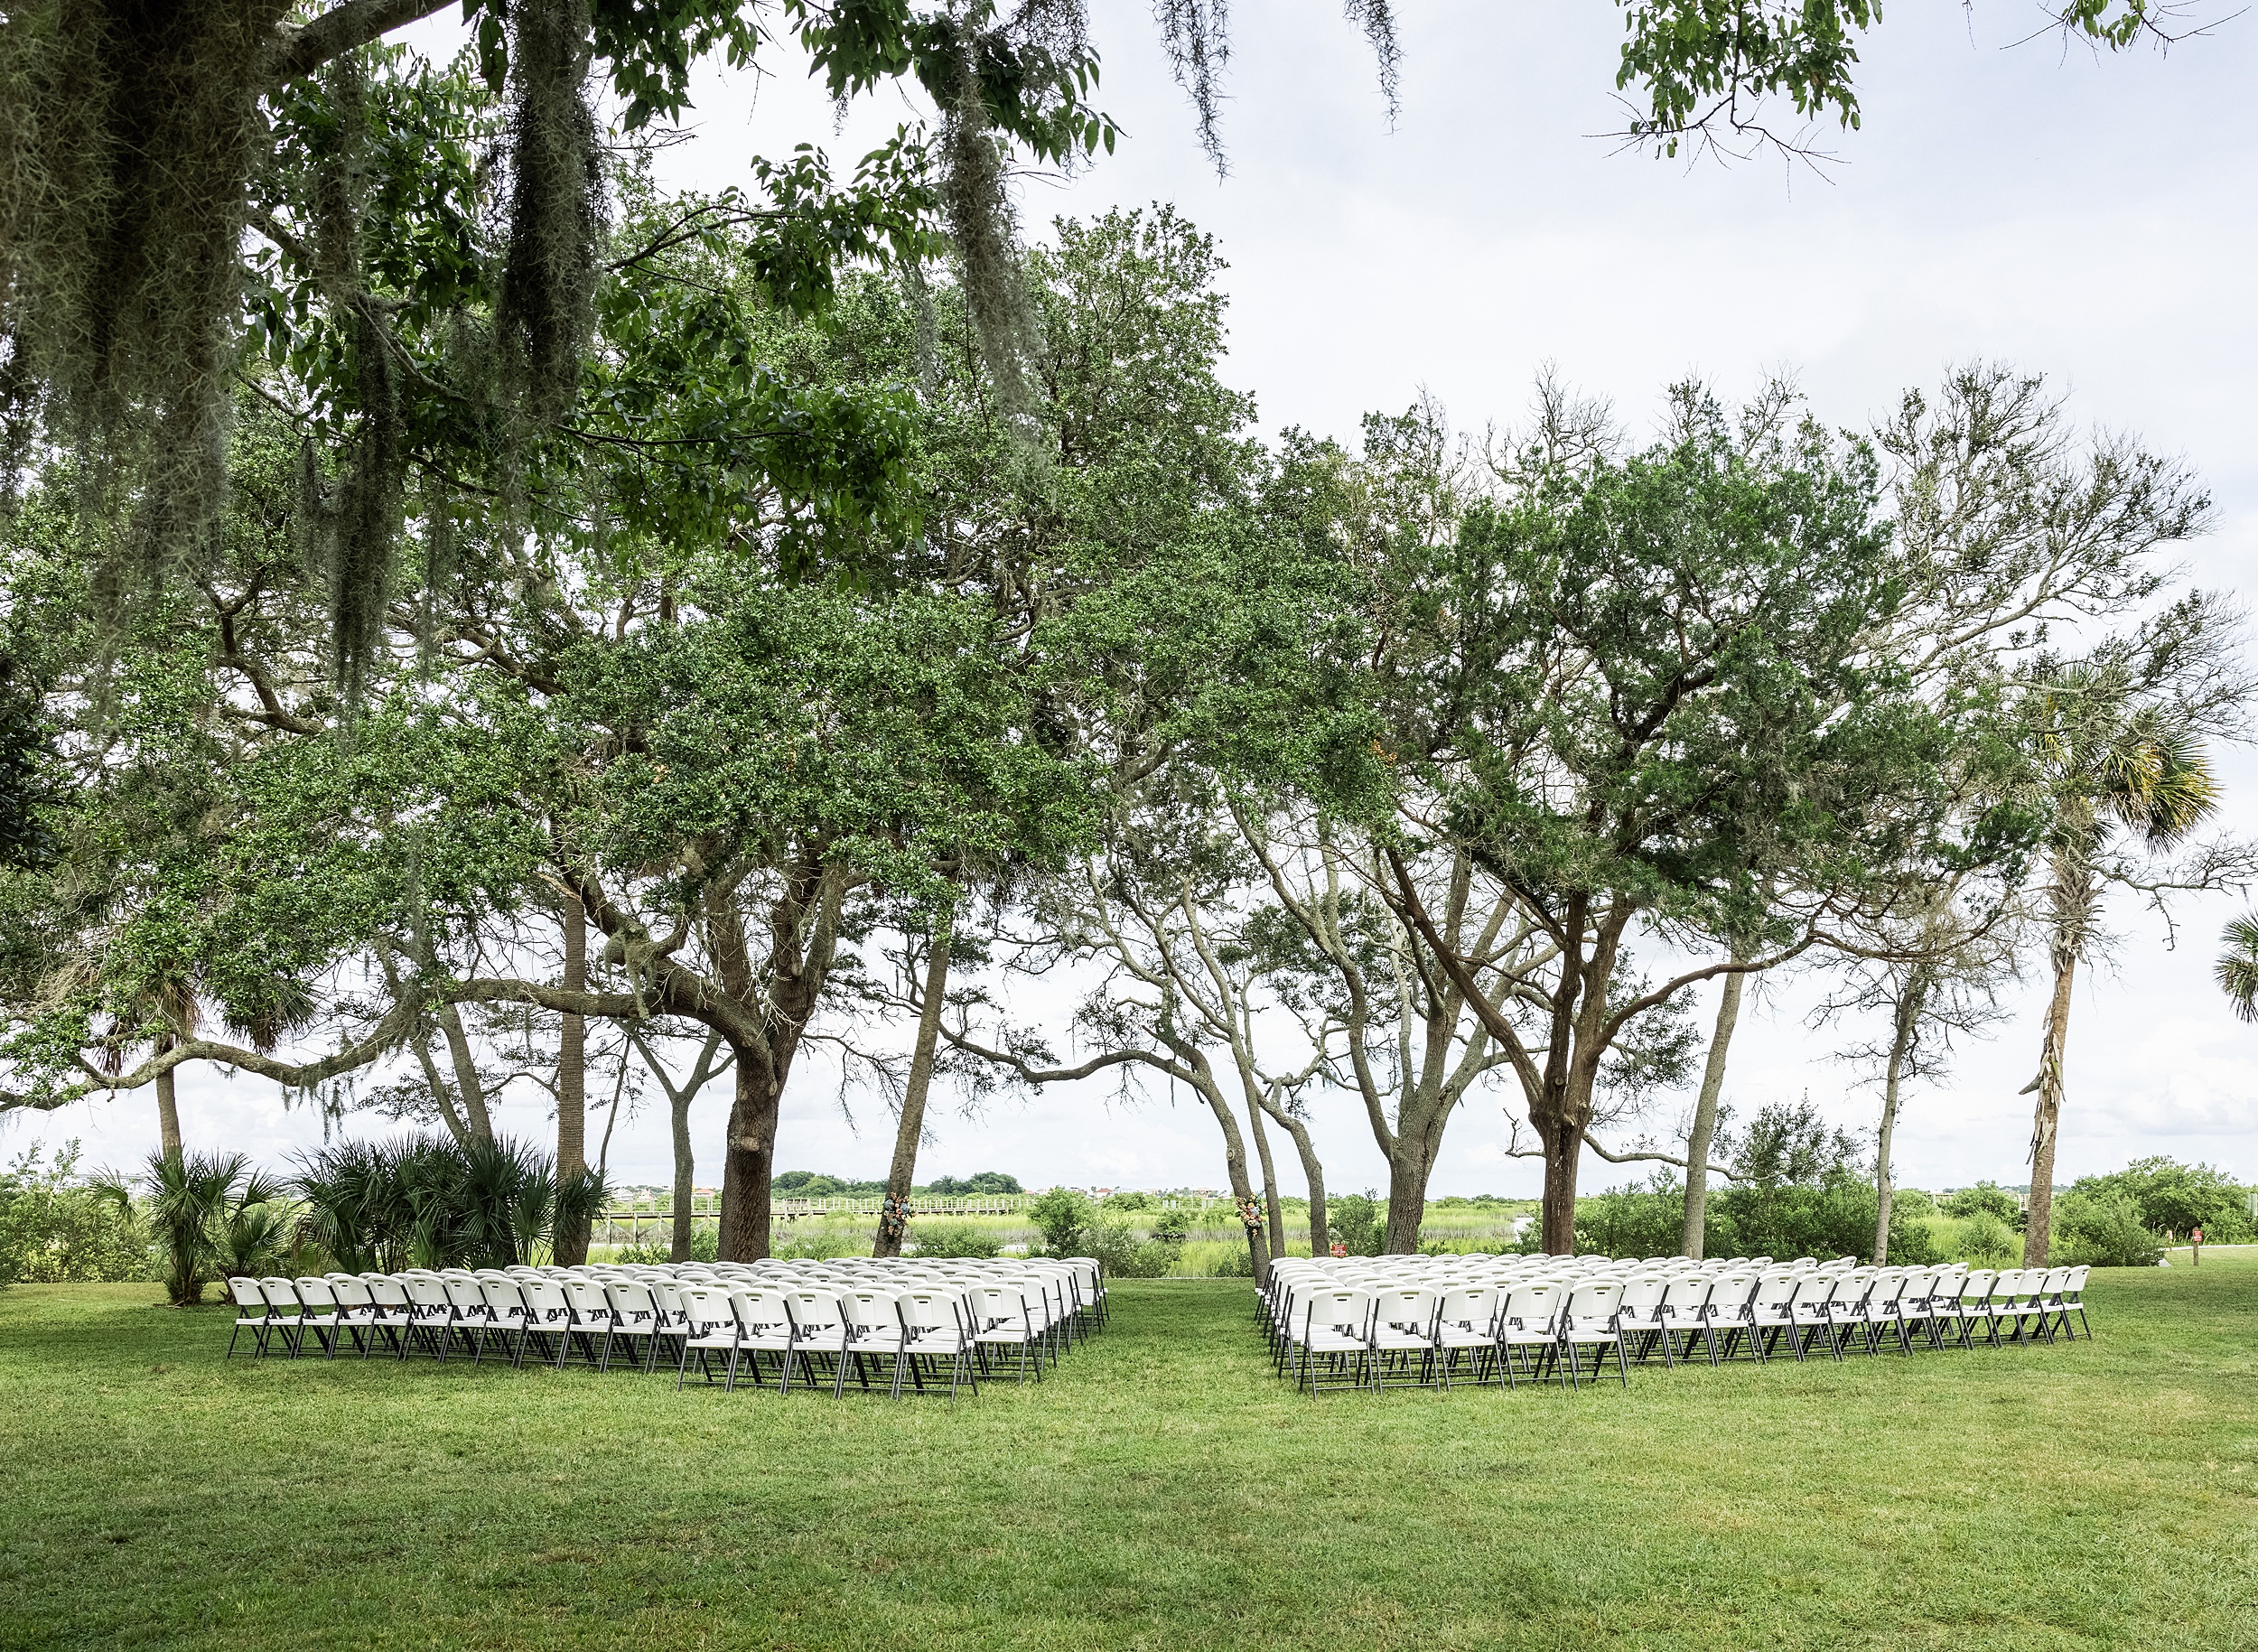 Details of a fountain of youth wedding ceremony set up on a grassy lawn under oak trees with white chairs